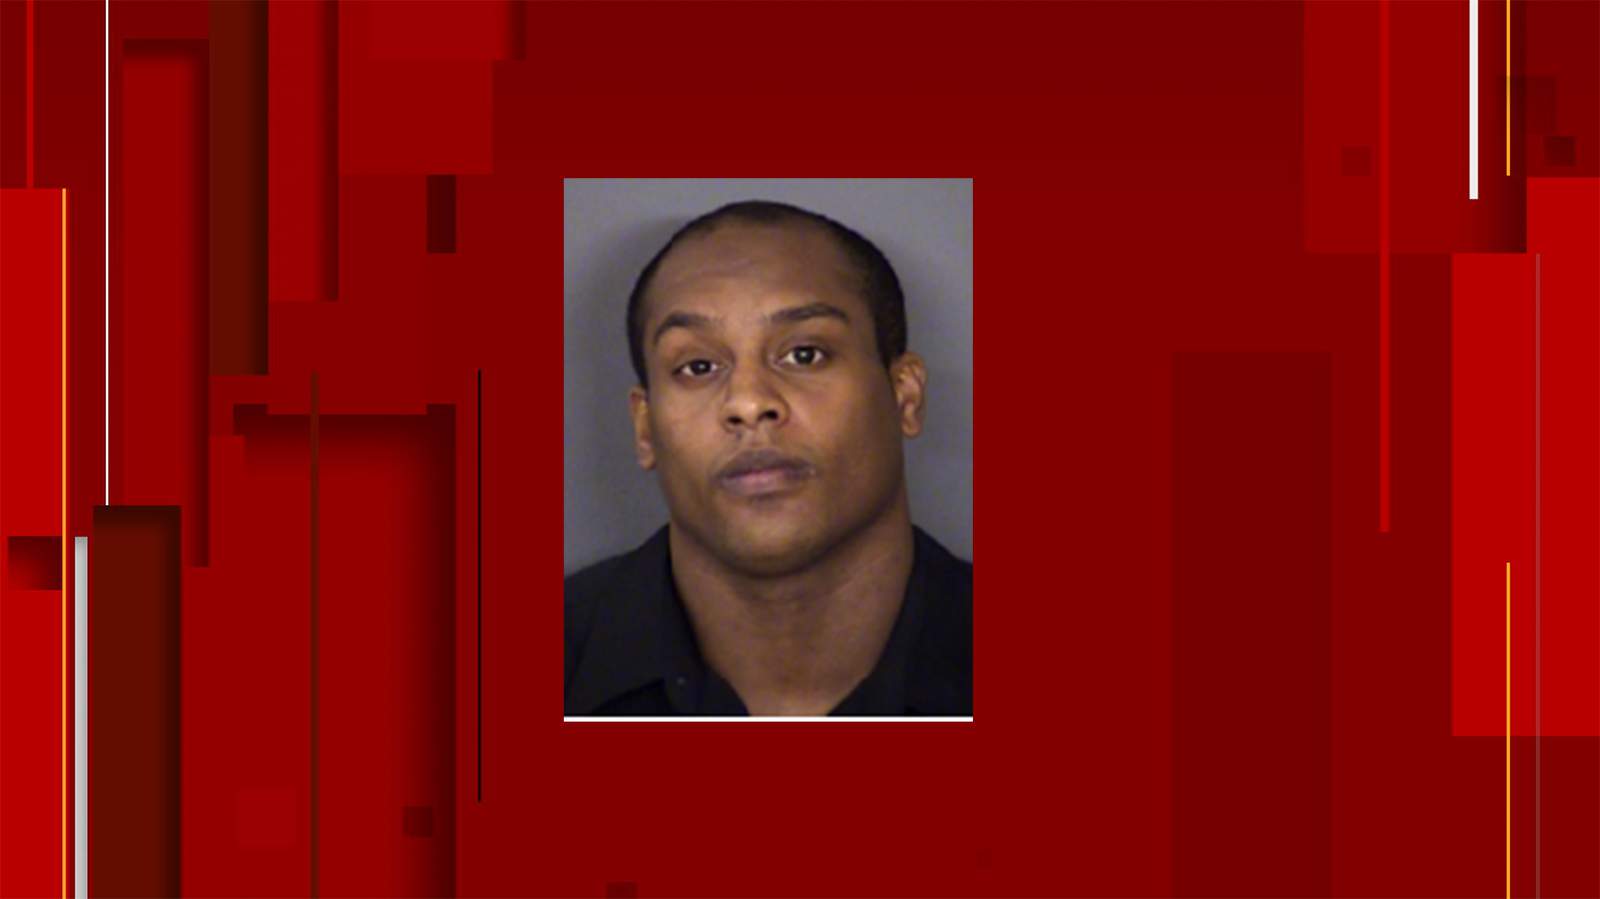 Have you seen this man? SAPD seeks man wanted for aggravated assault, robbery charges